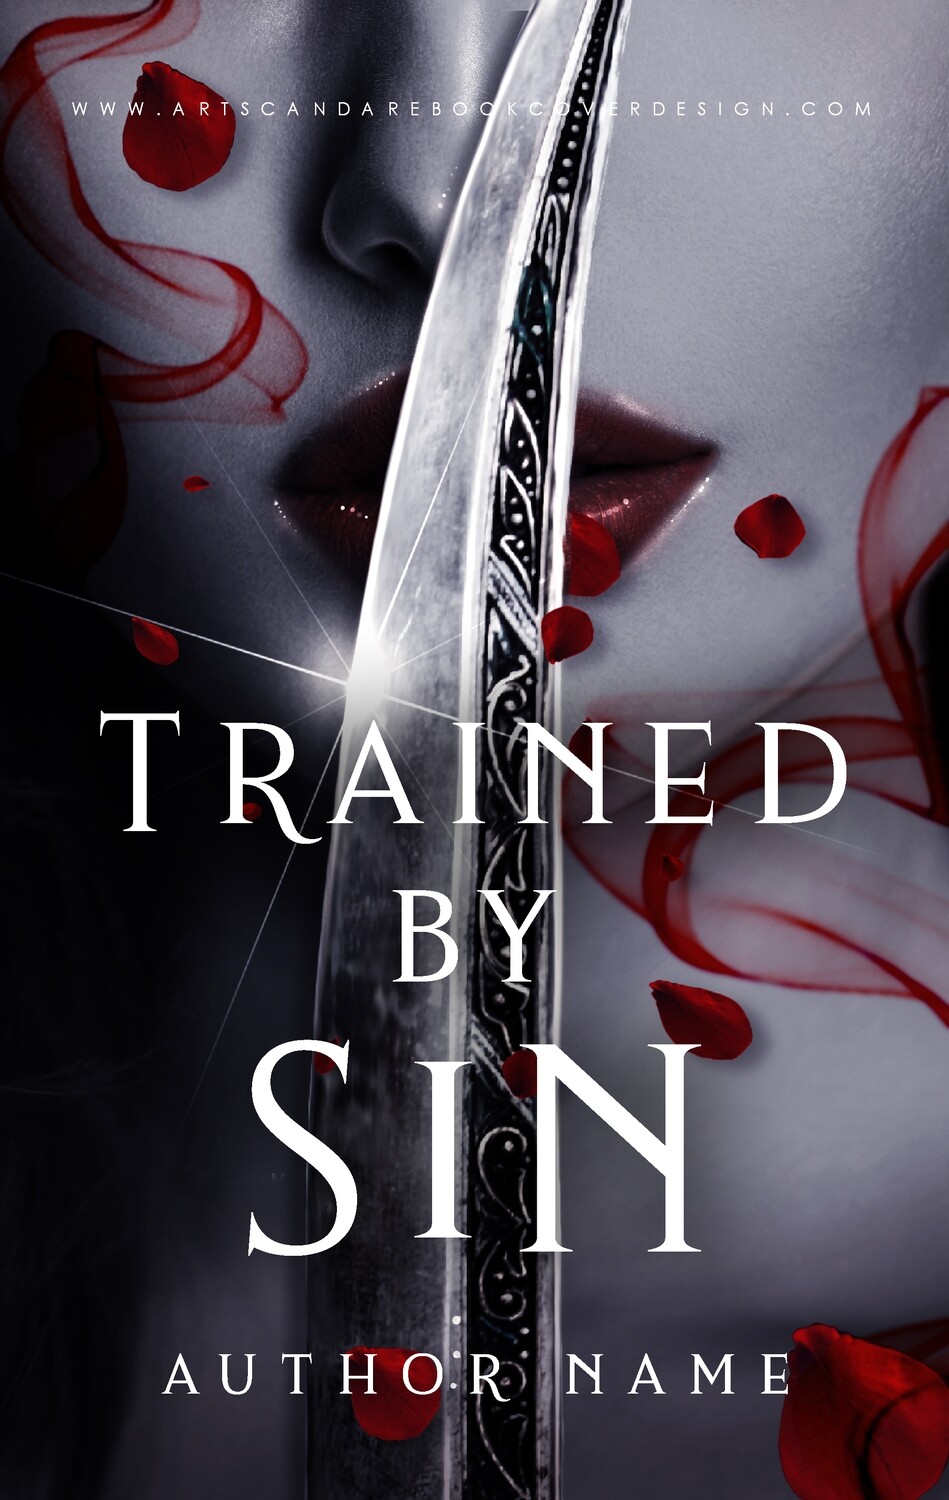 Ebook: Trained by Sin